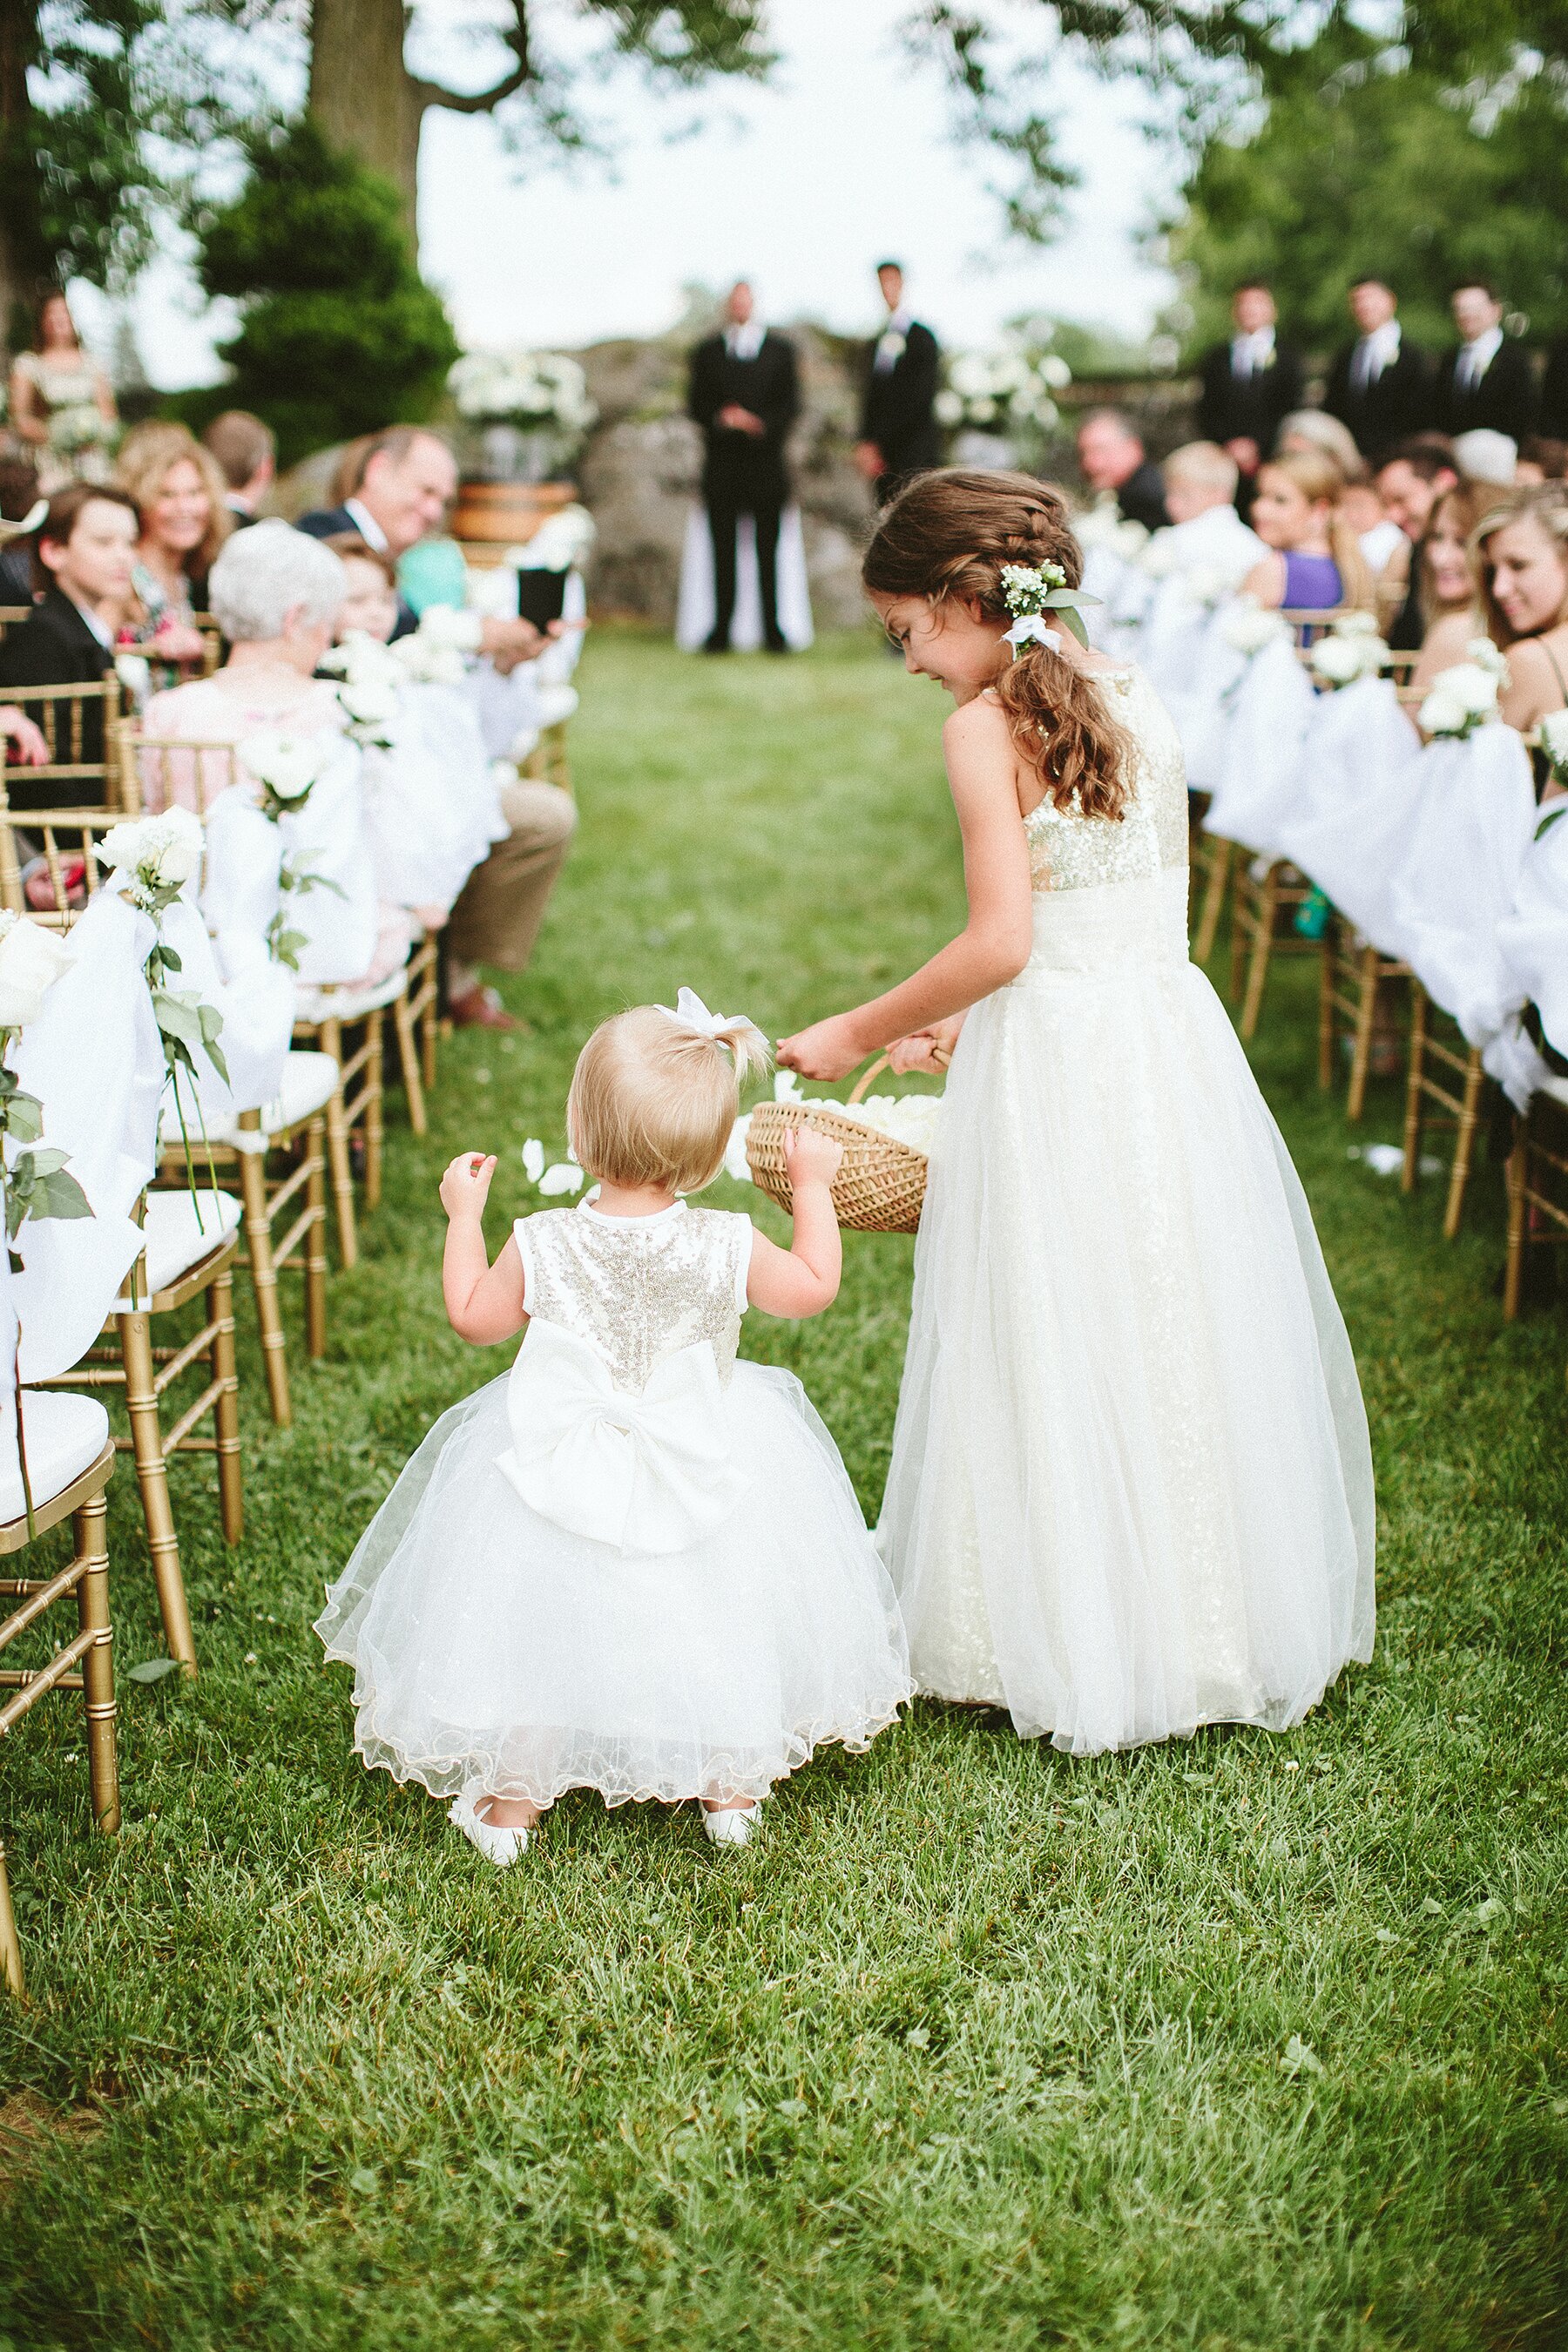 Read This Before Asking Your Flower Girl To Toss Petals Down